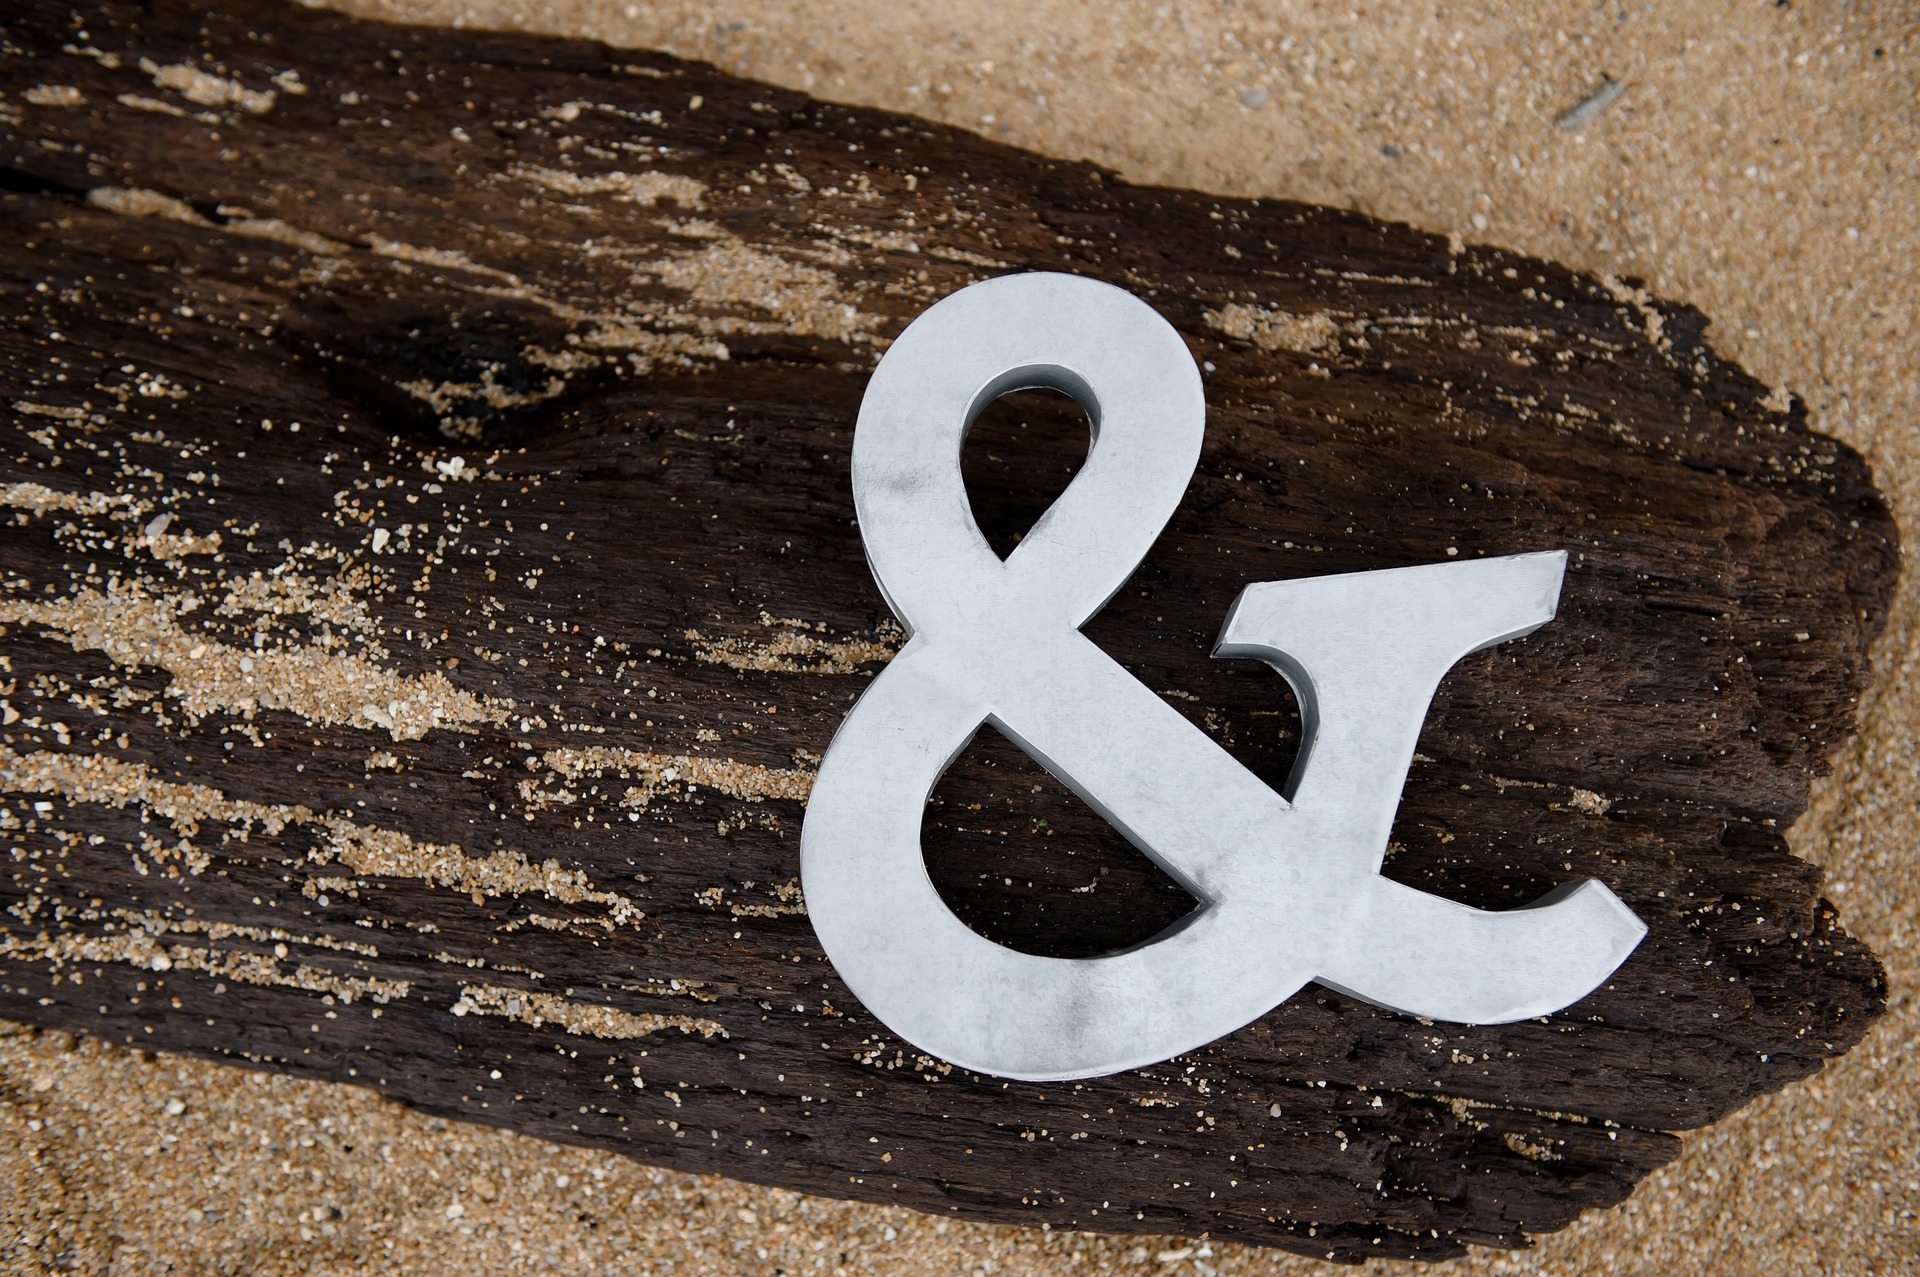 The and symbol - ampersand